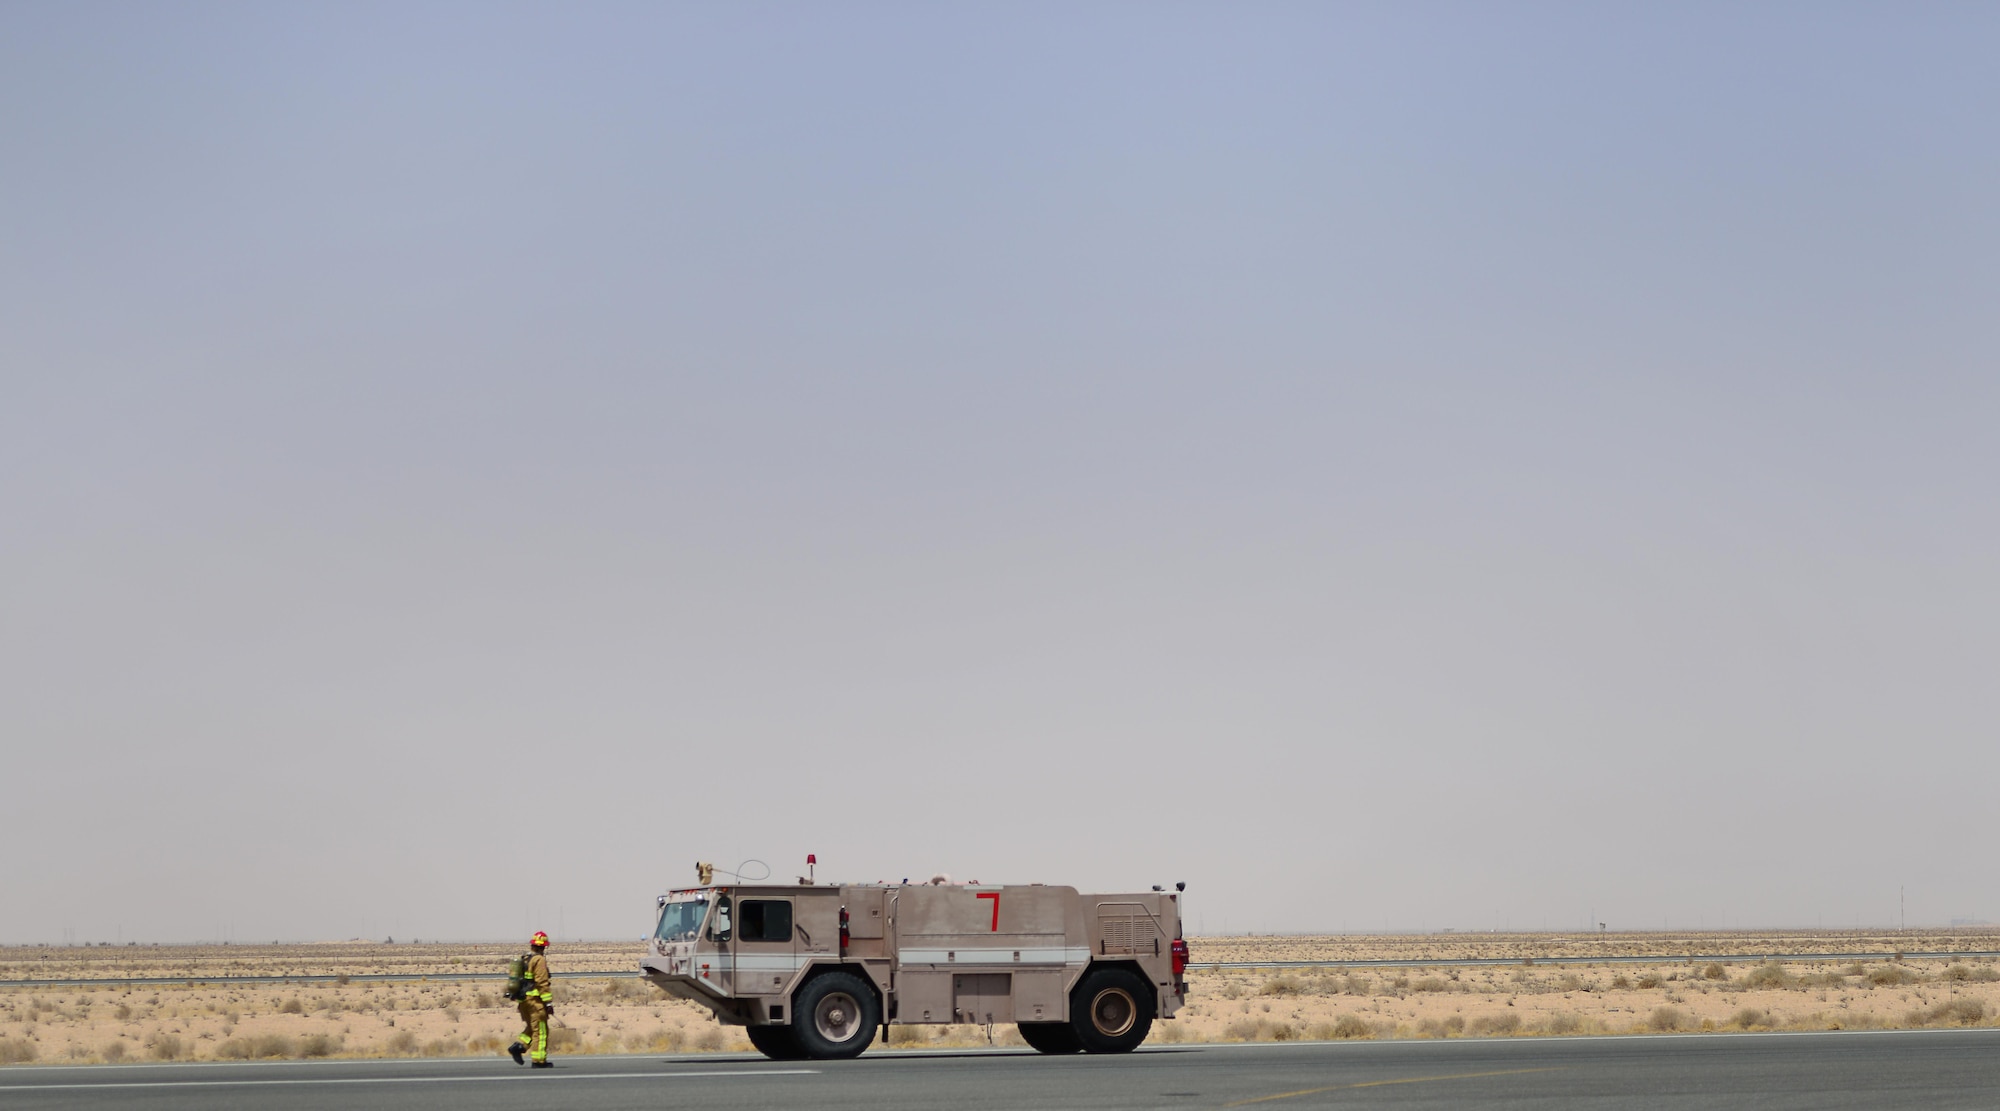 U.S. Air Force fire fighters assigned to the 407th Expeditionary Civil Engineer Squadron, walk back to their trucks after a simulated in-flight emergency response to an Italian Air Force AMX A-11 Ghibli aircraft during an Aircraft Arrested System engagement in Southwest Asia on July 3, 2017. The 407th ECES fire department operate as first responders to all U.S. and coalition aircraft in the area of responsibility. (U.S. Air Force photo by Tech. Sgt. Andy M. Kin)